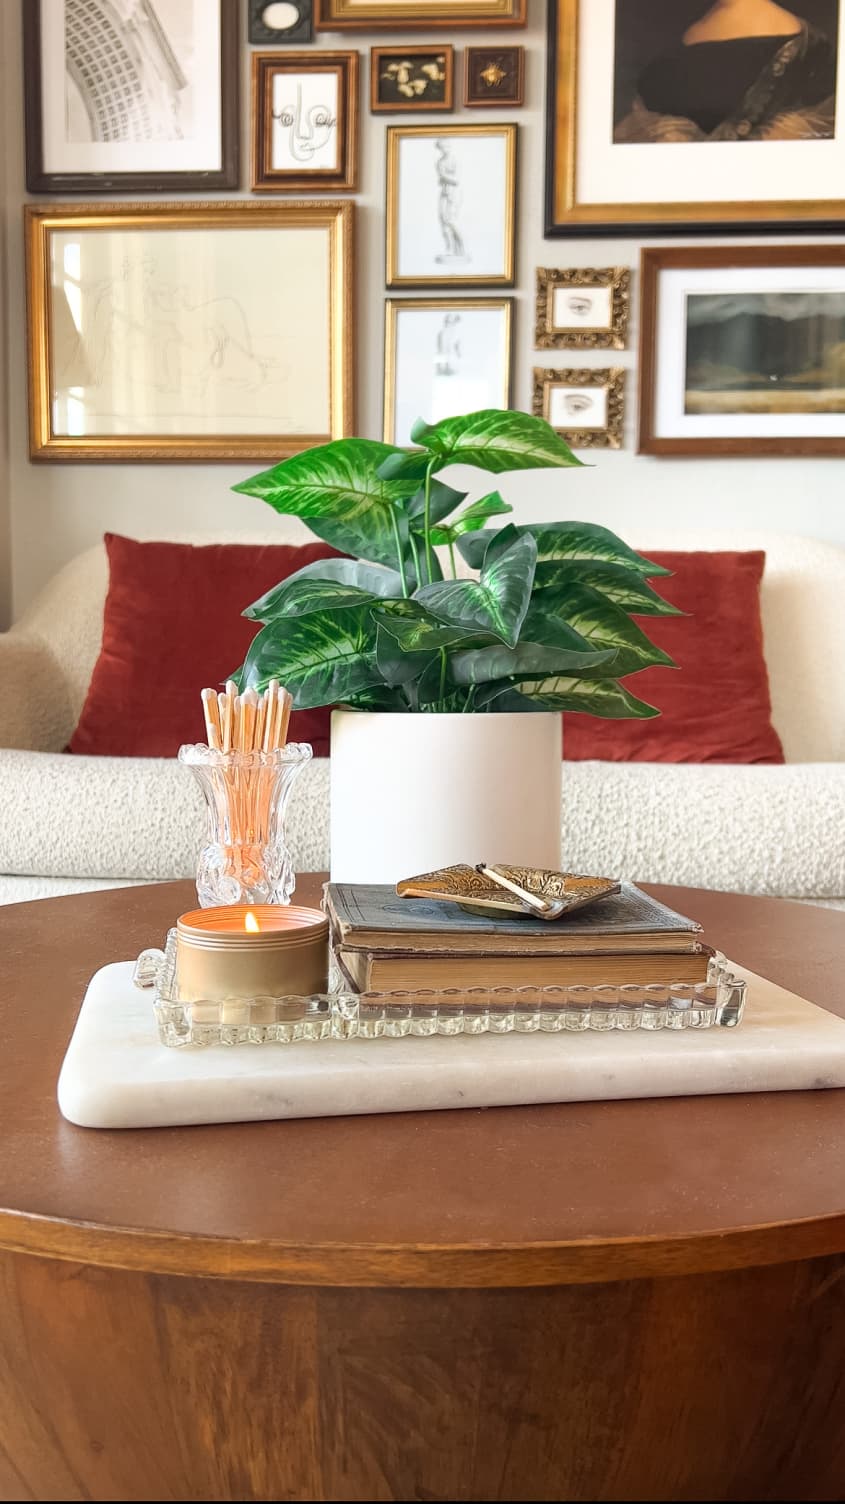 Small glass vase holding matches on coffee table